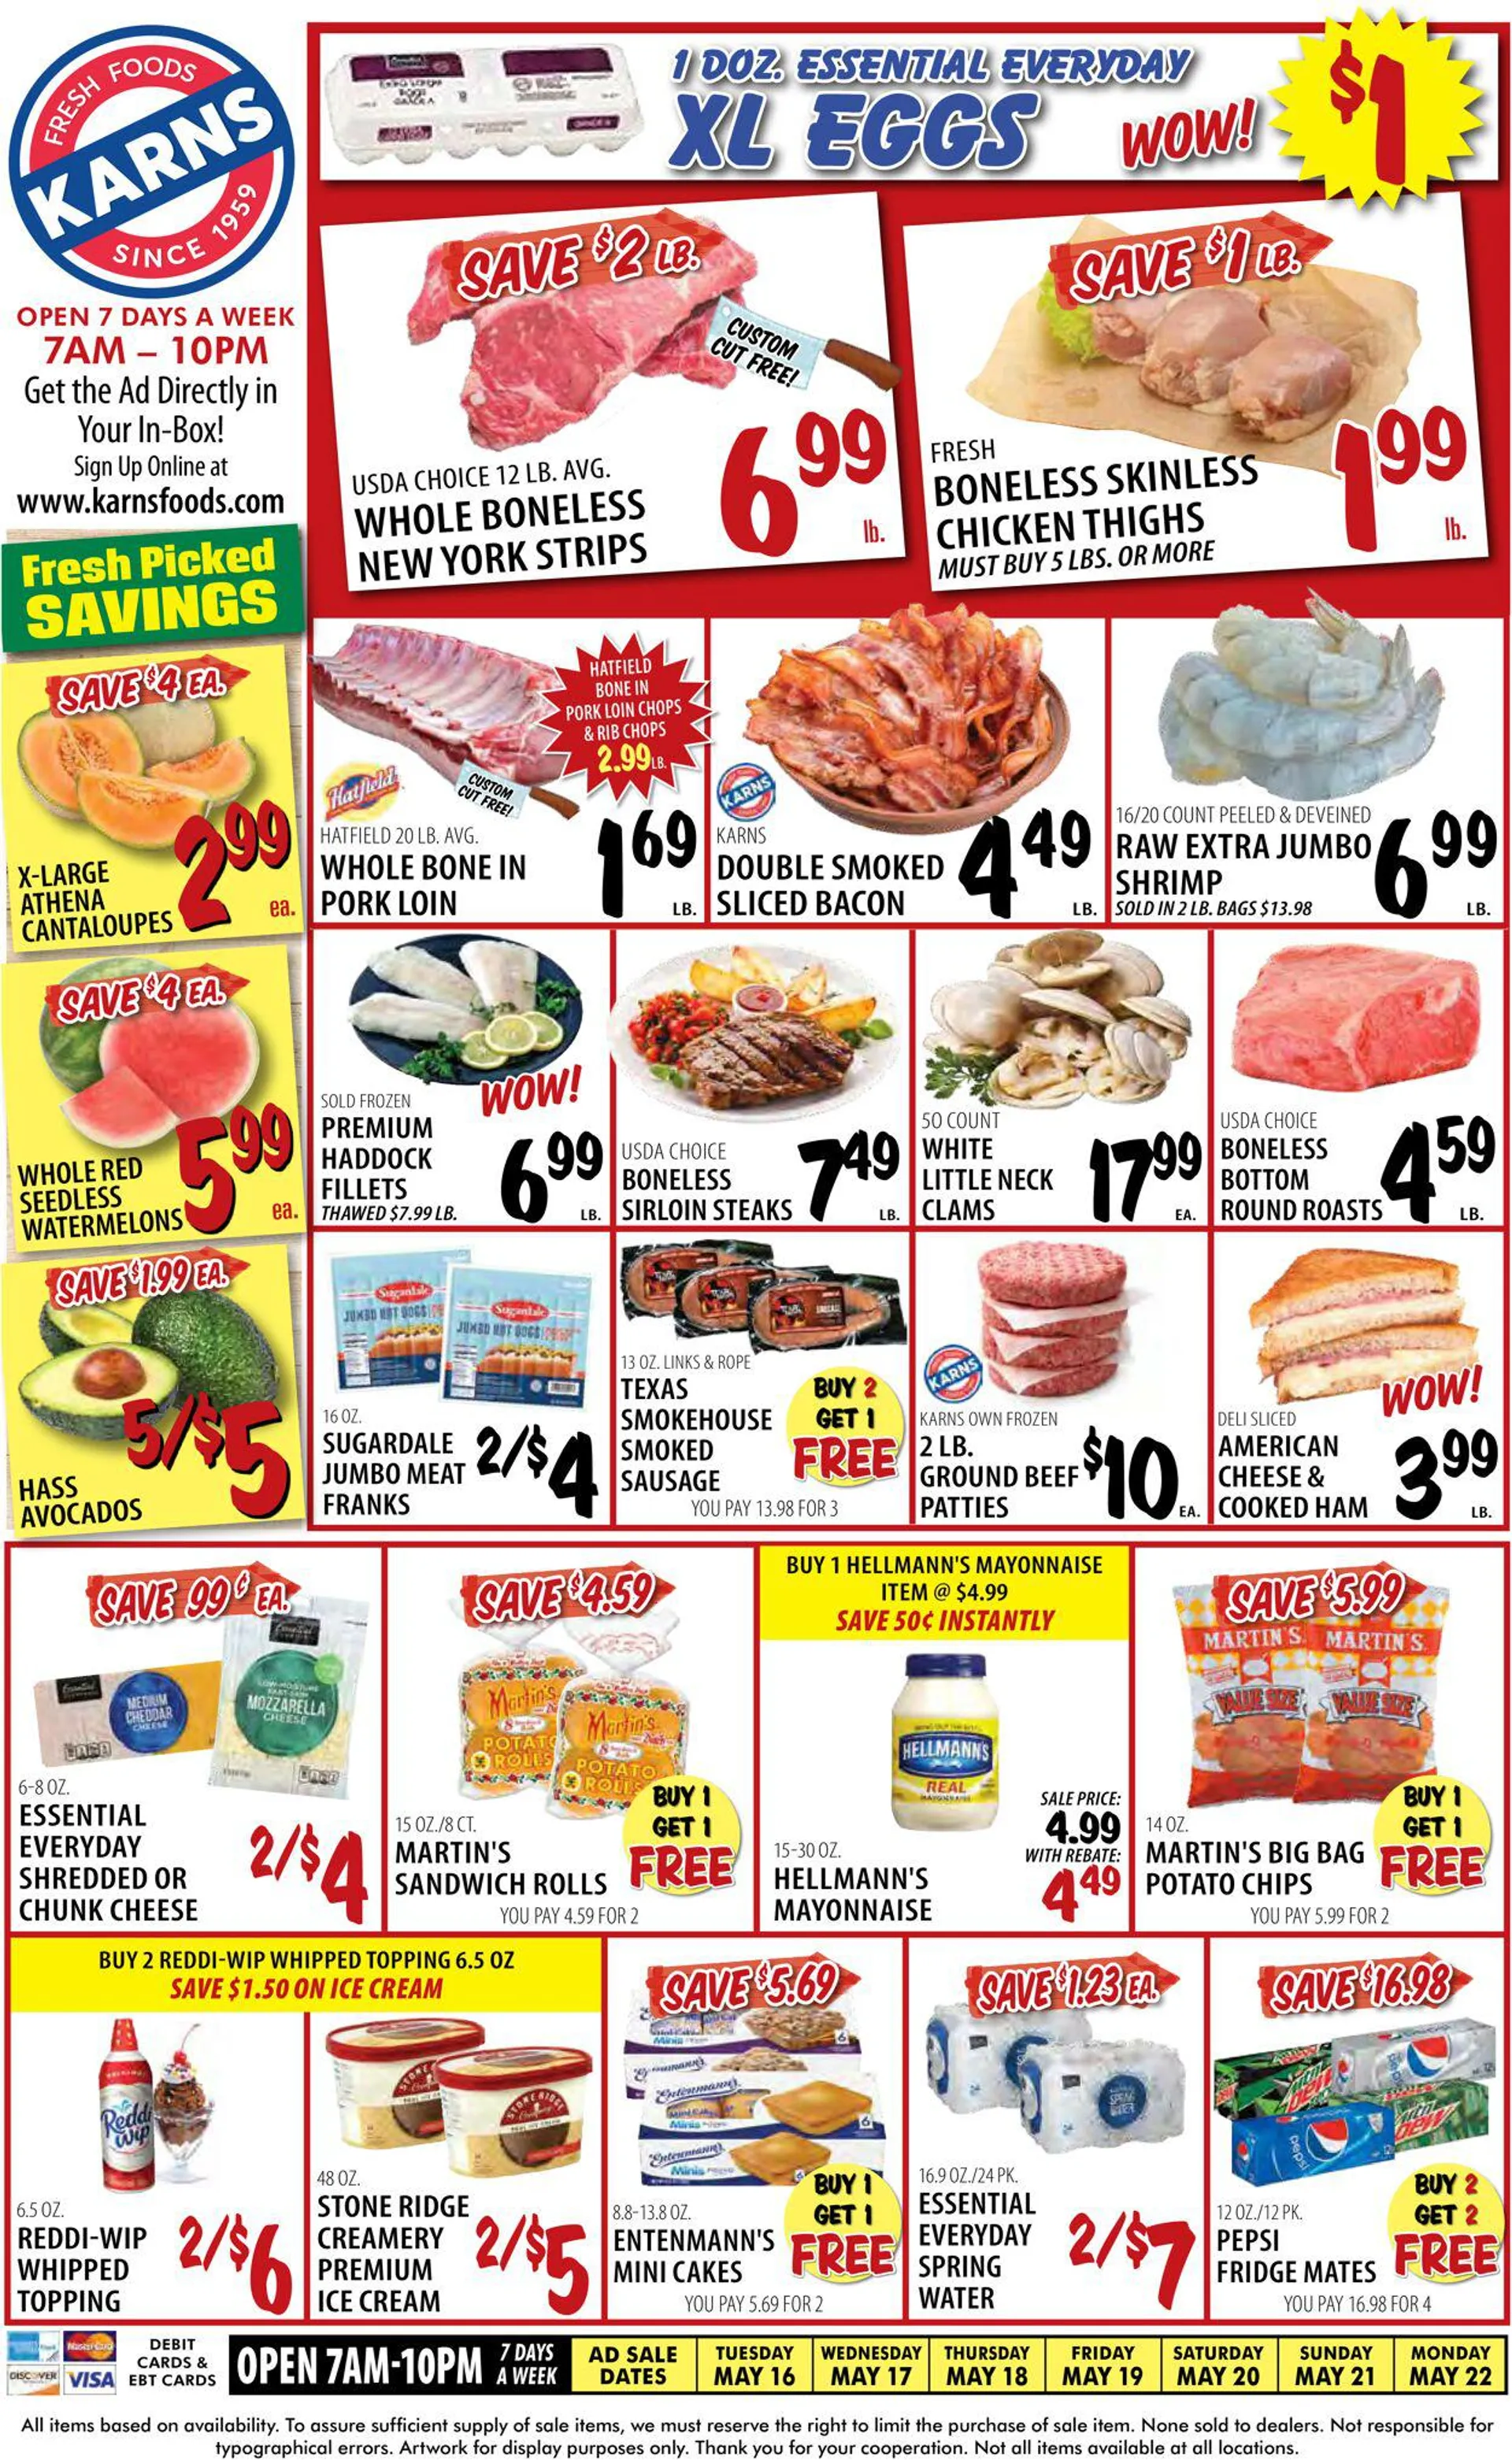 Karns Quality Foods Current weekly ad - 1